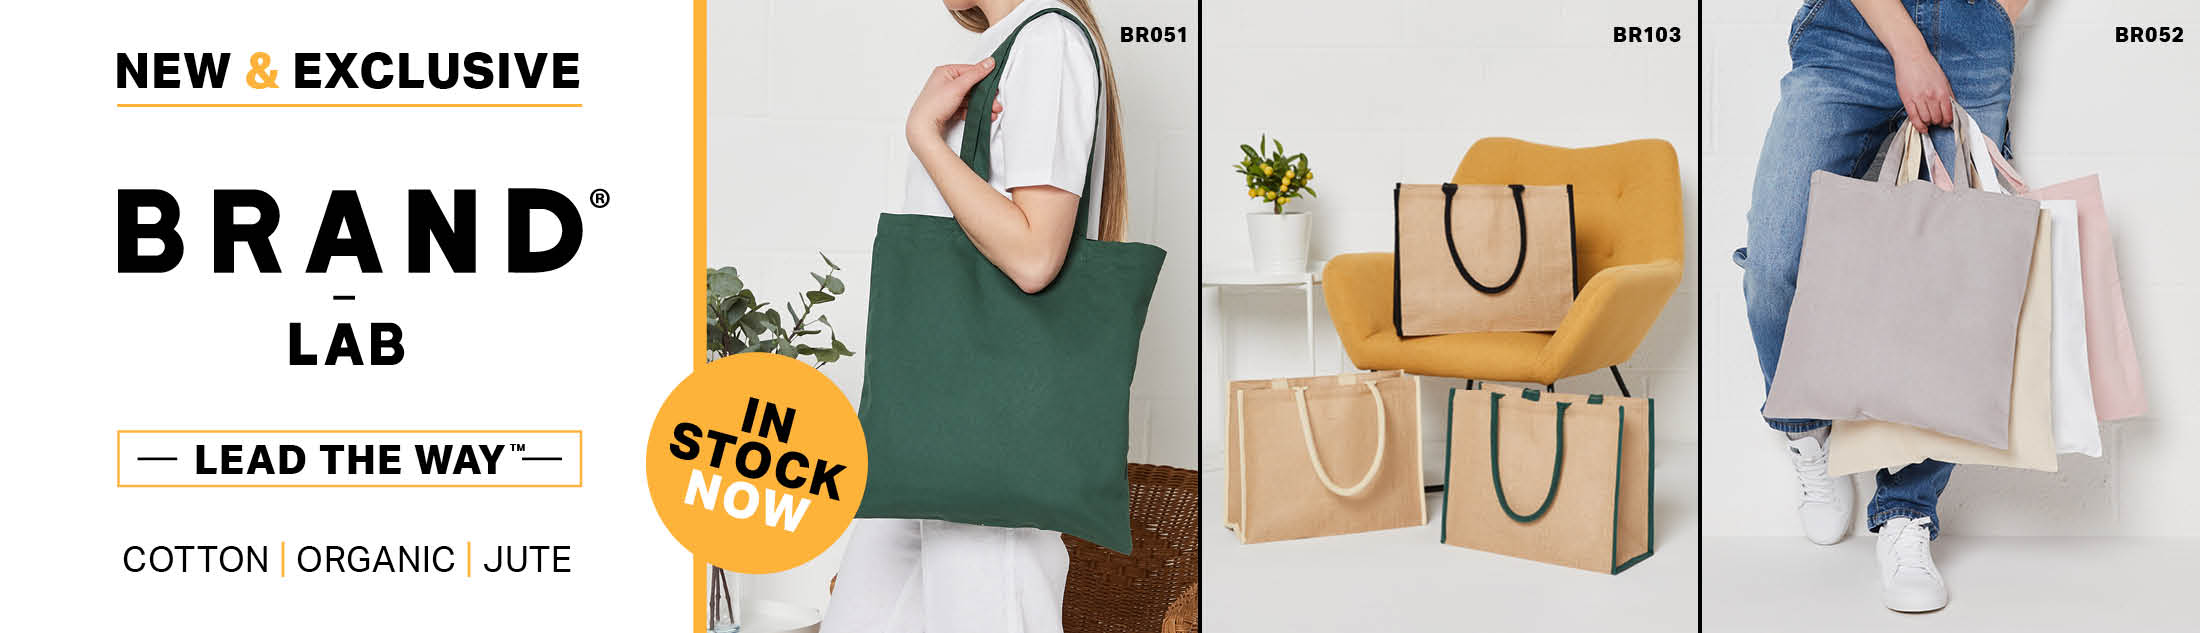 New Brand Lab - Bags now in stock!